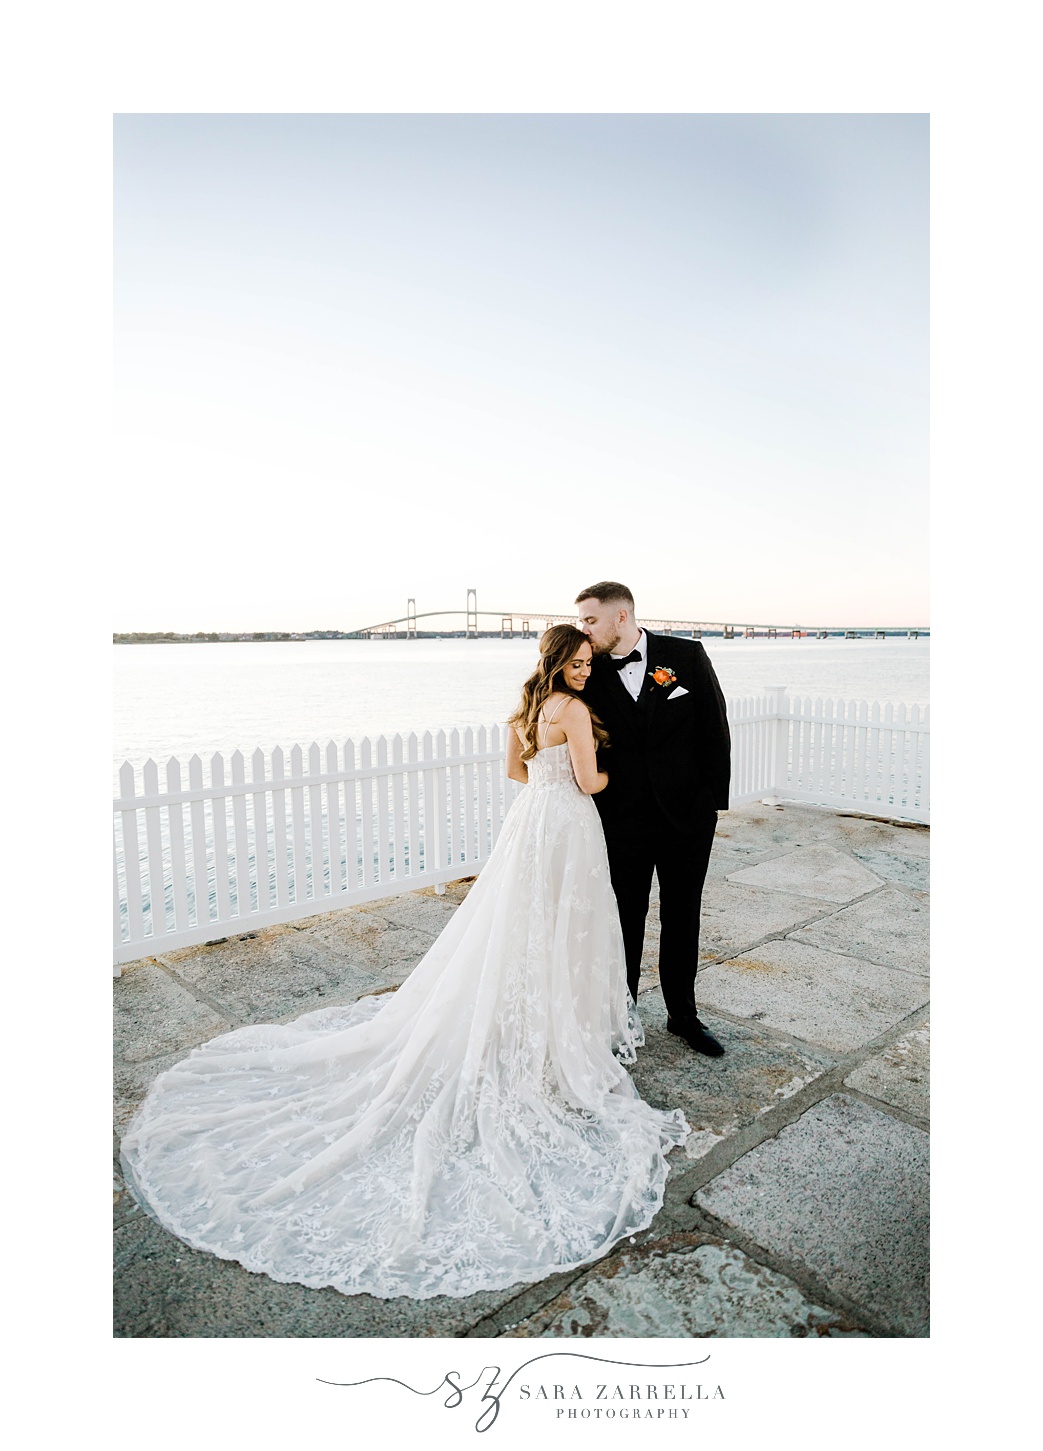 groom kisses bride's forehead by white picket fence outside Newport Harbor Island Resort